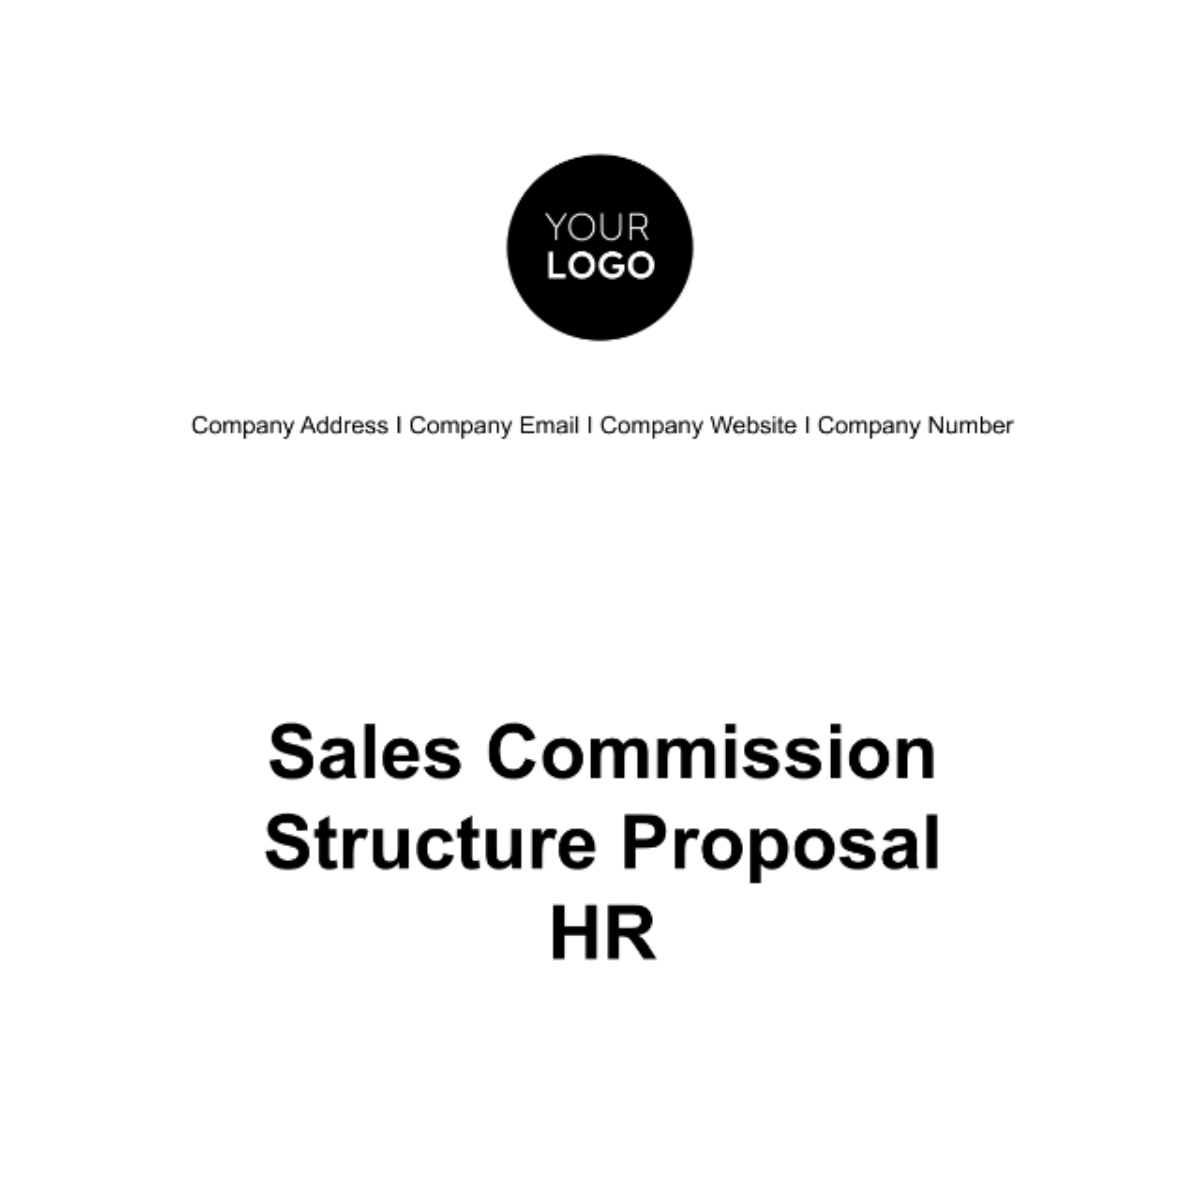 Free Sales Commission Structure Proposal HR Template